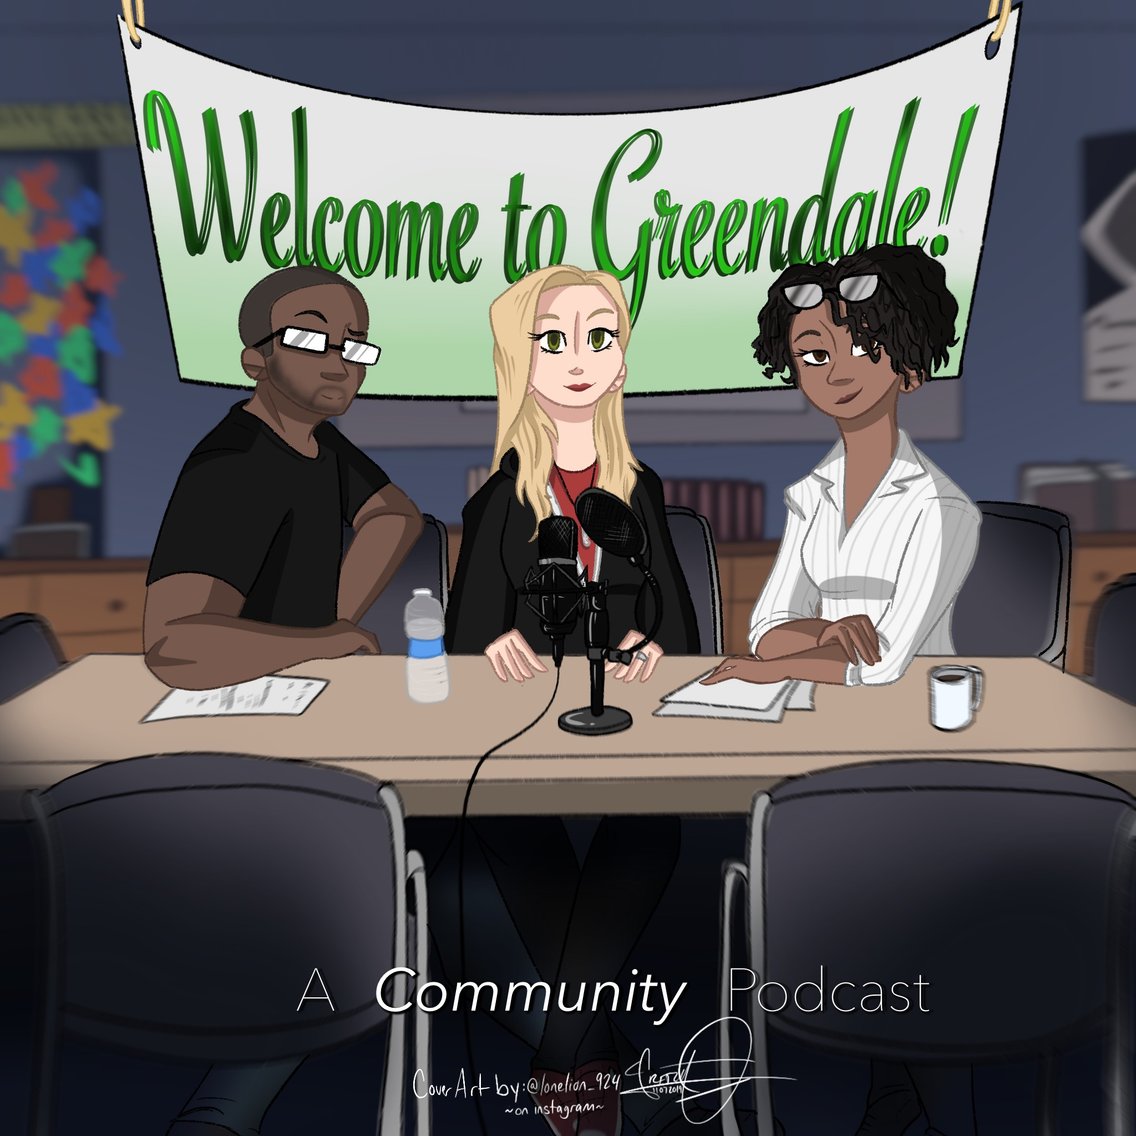 Welcome to Greendale: A Community Podcast - Cover Image